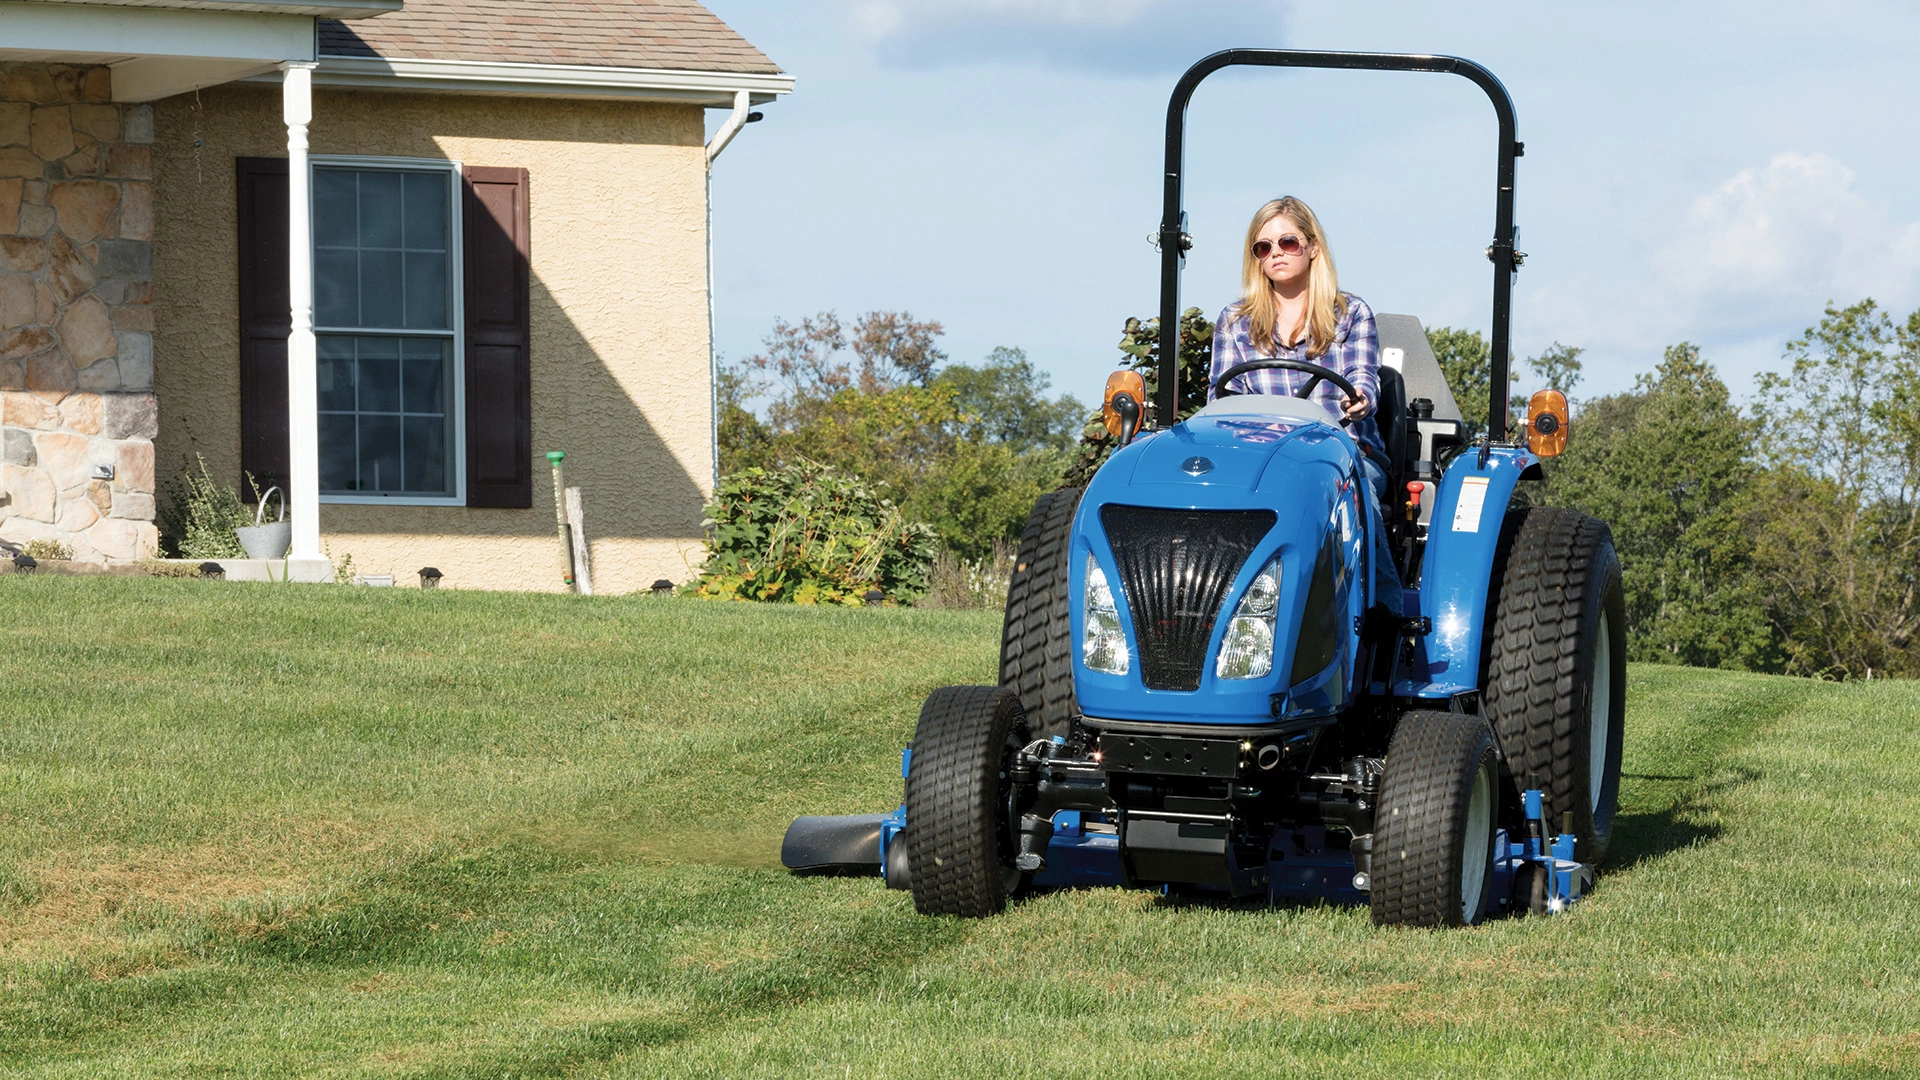 Who Makes New Holland Compact Tractors?